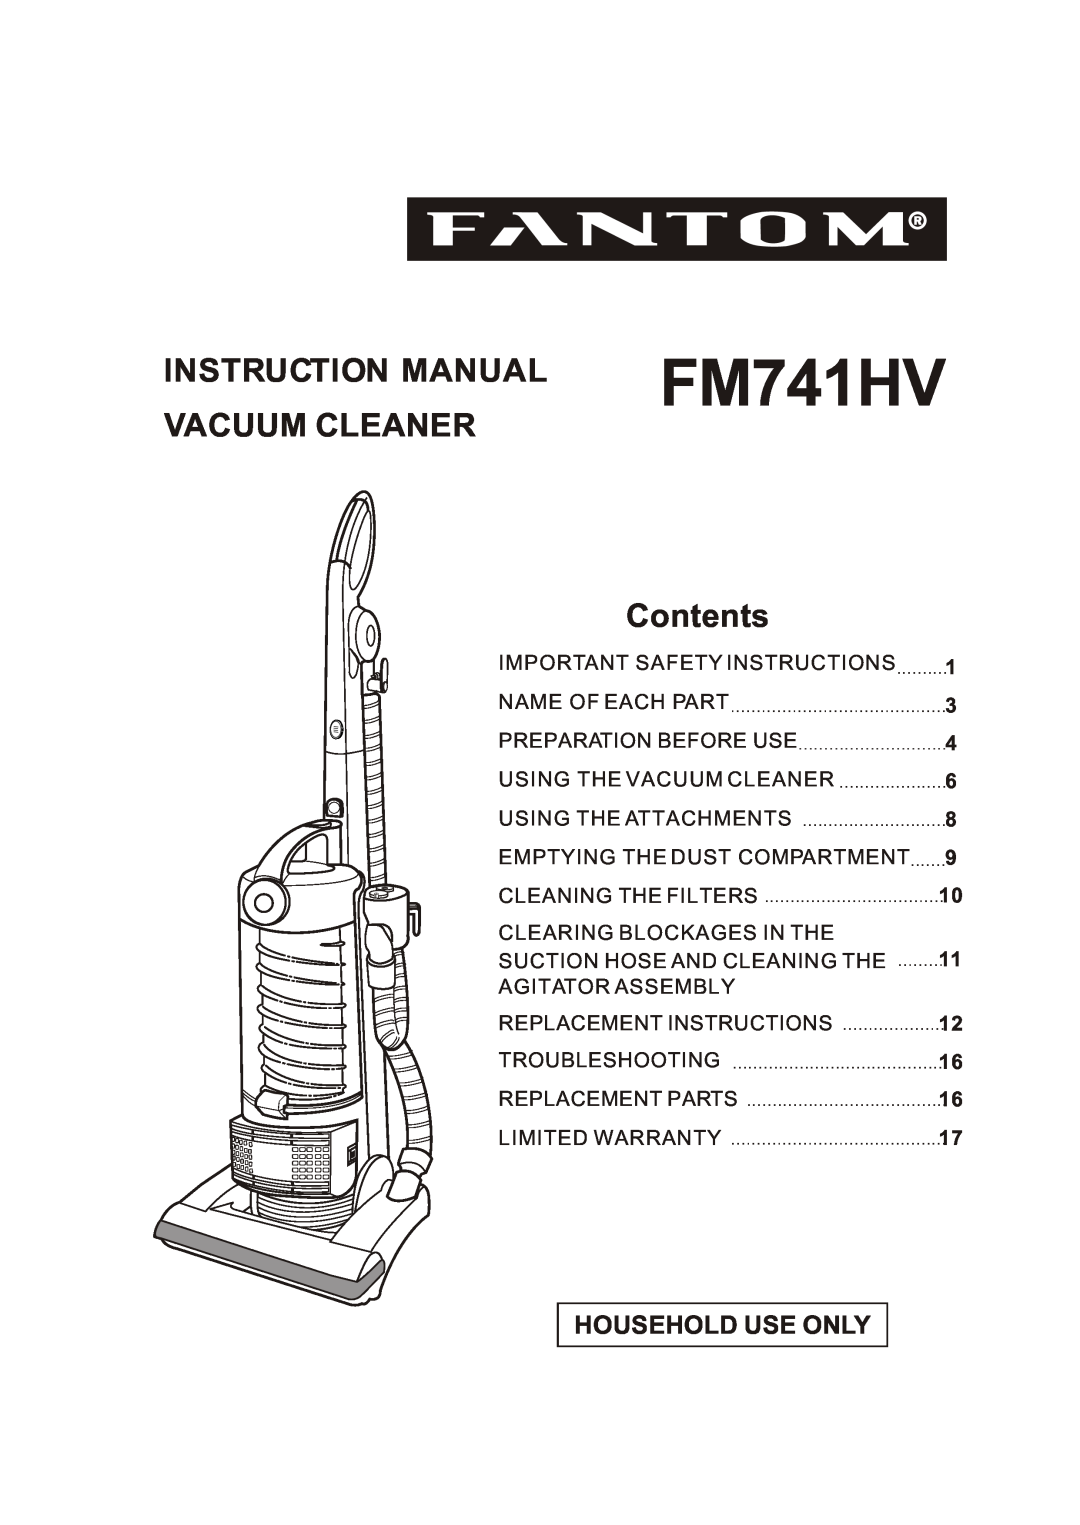 Fantom Vacuum FM741HV instruction manual Vacuum Cleaner, Contents, Household Use Only 